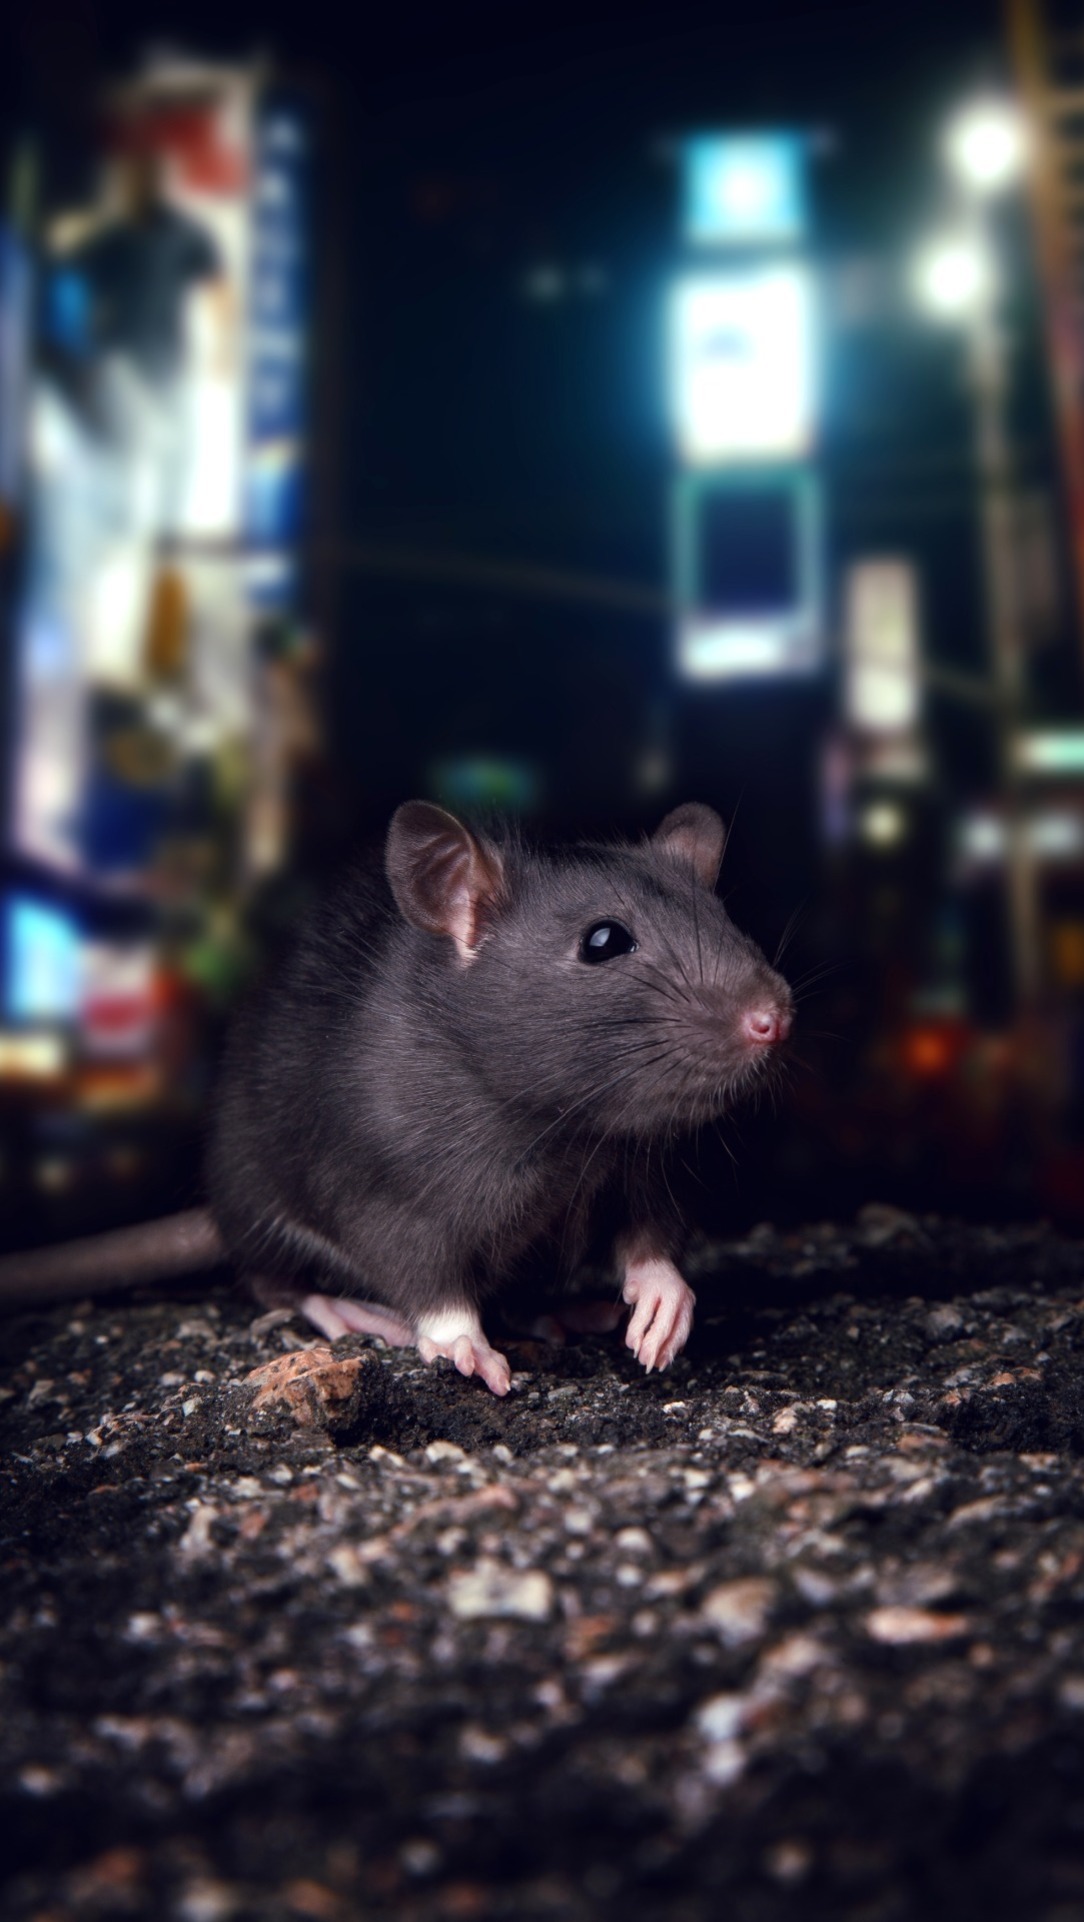 rat in the street at night